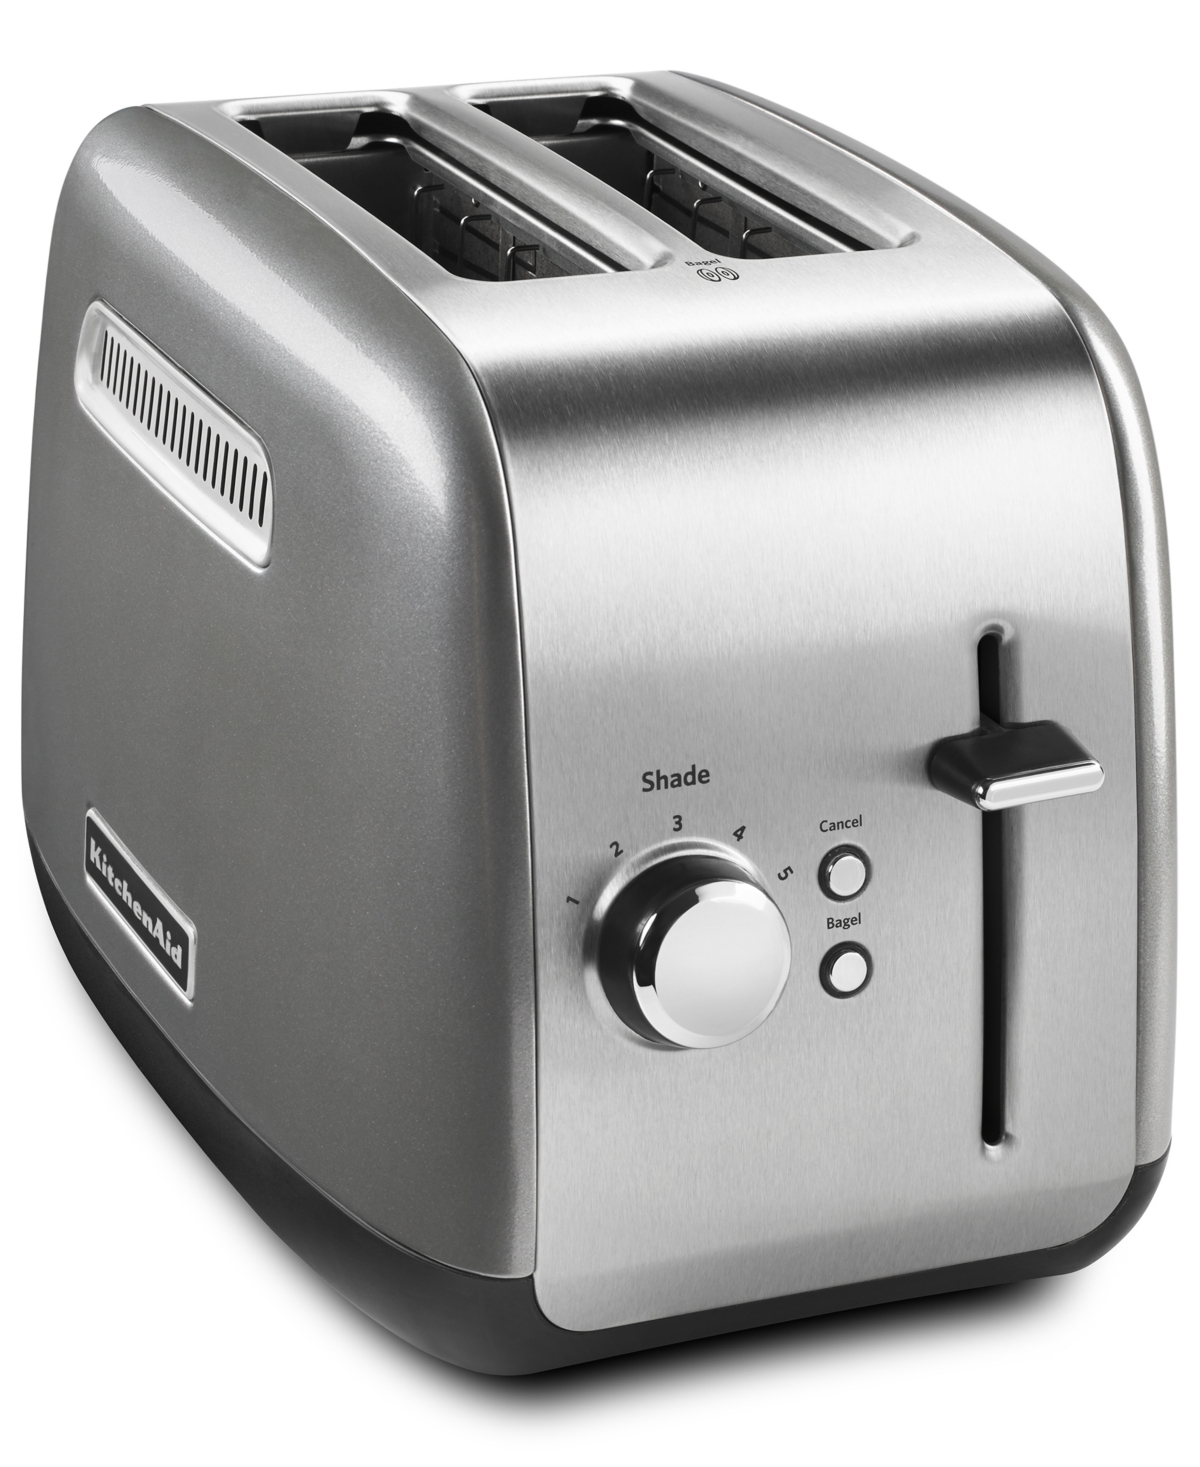 Kitchenaid Kmt2115 2-slice Toaster With Manual High-lift Lever In Contour Silver